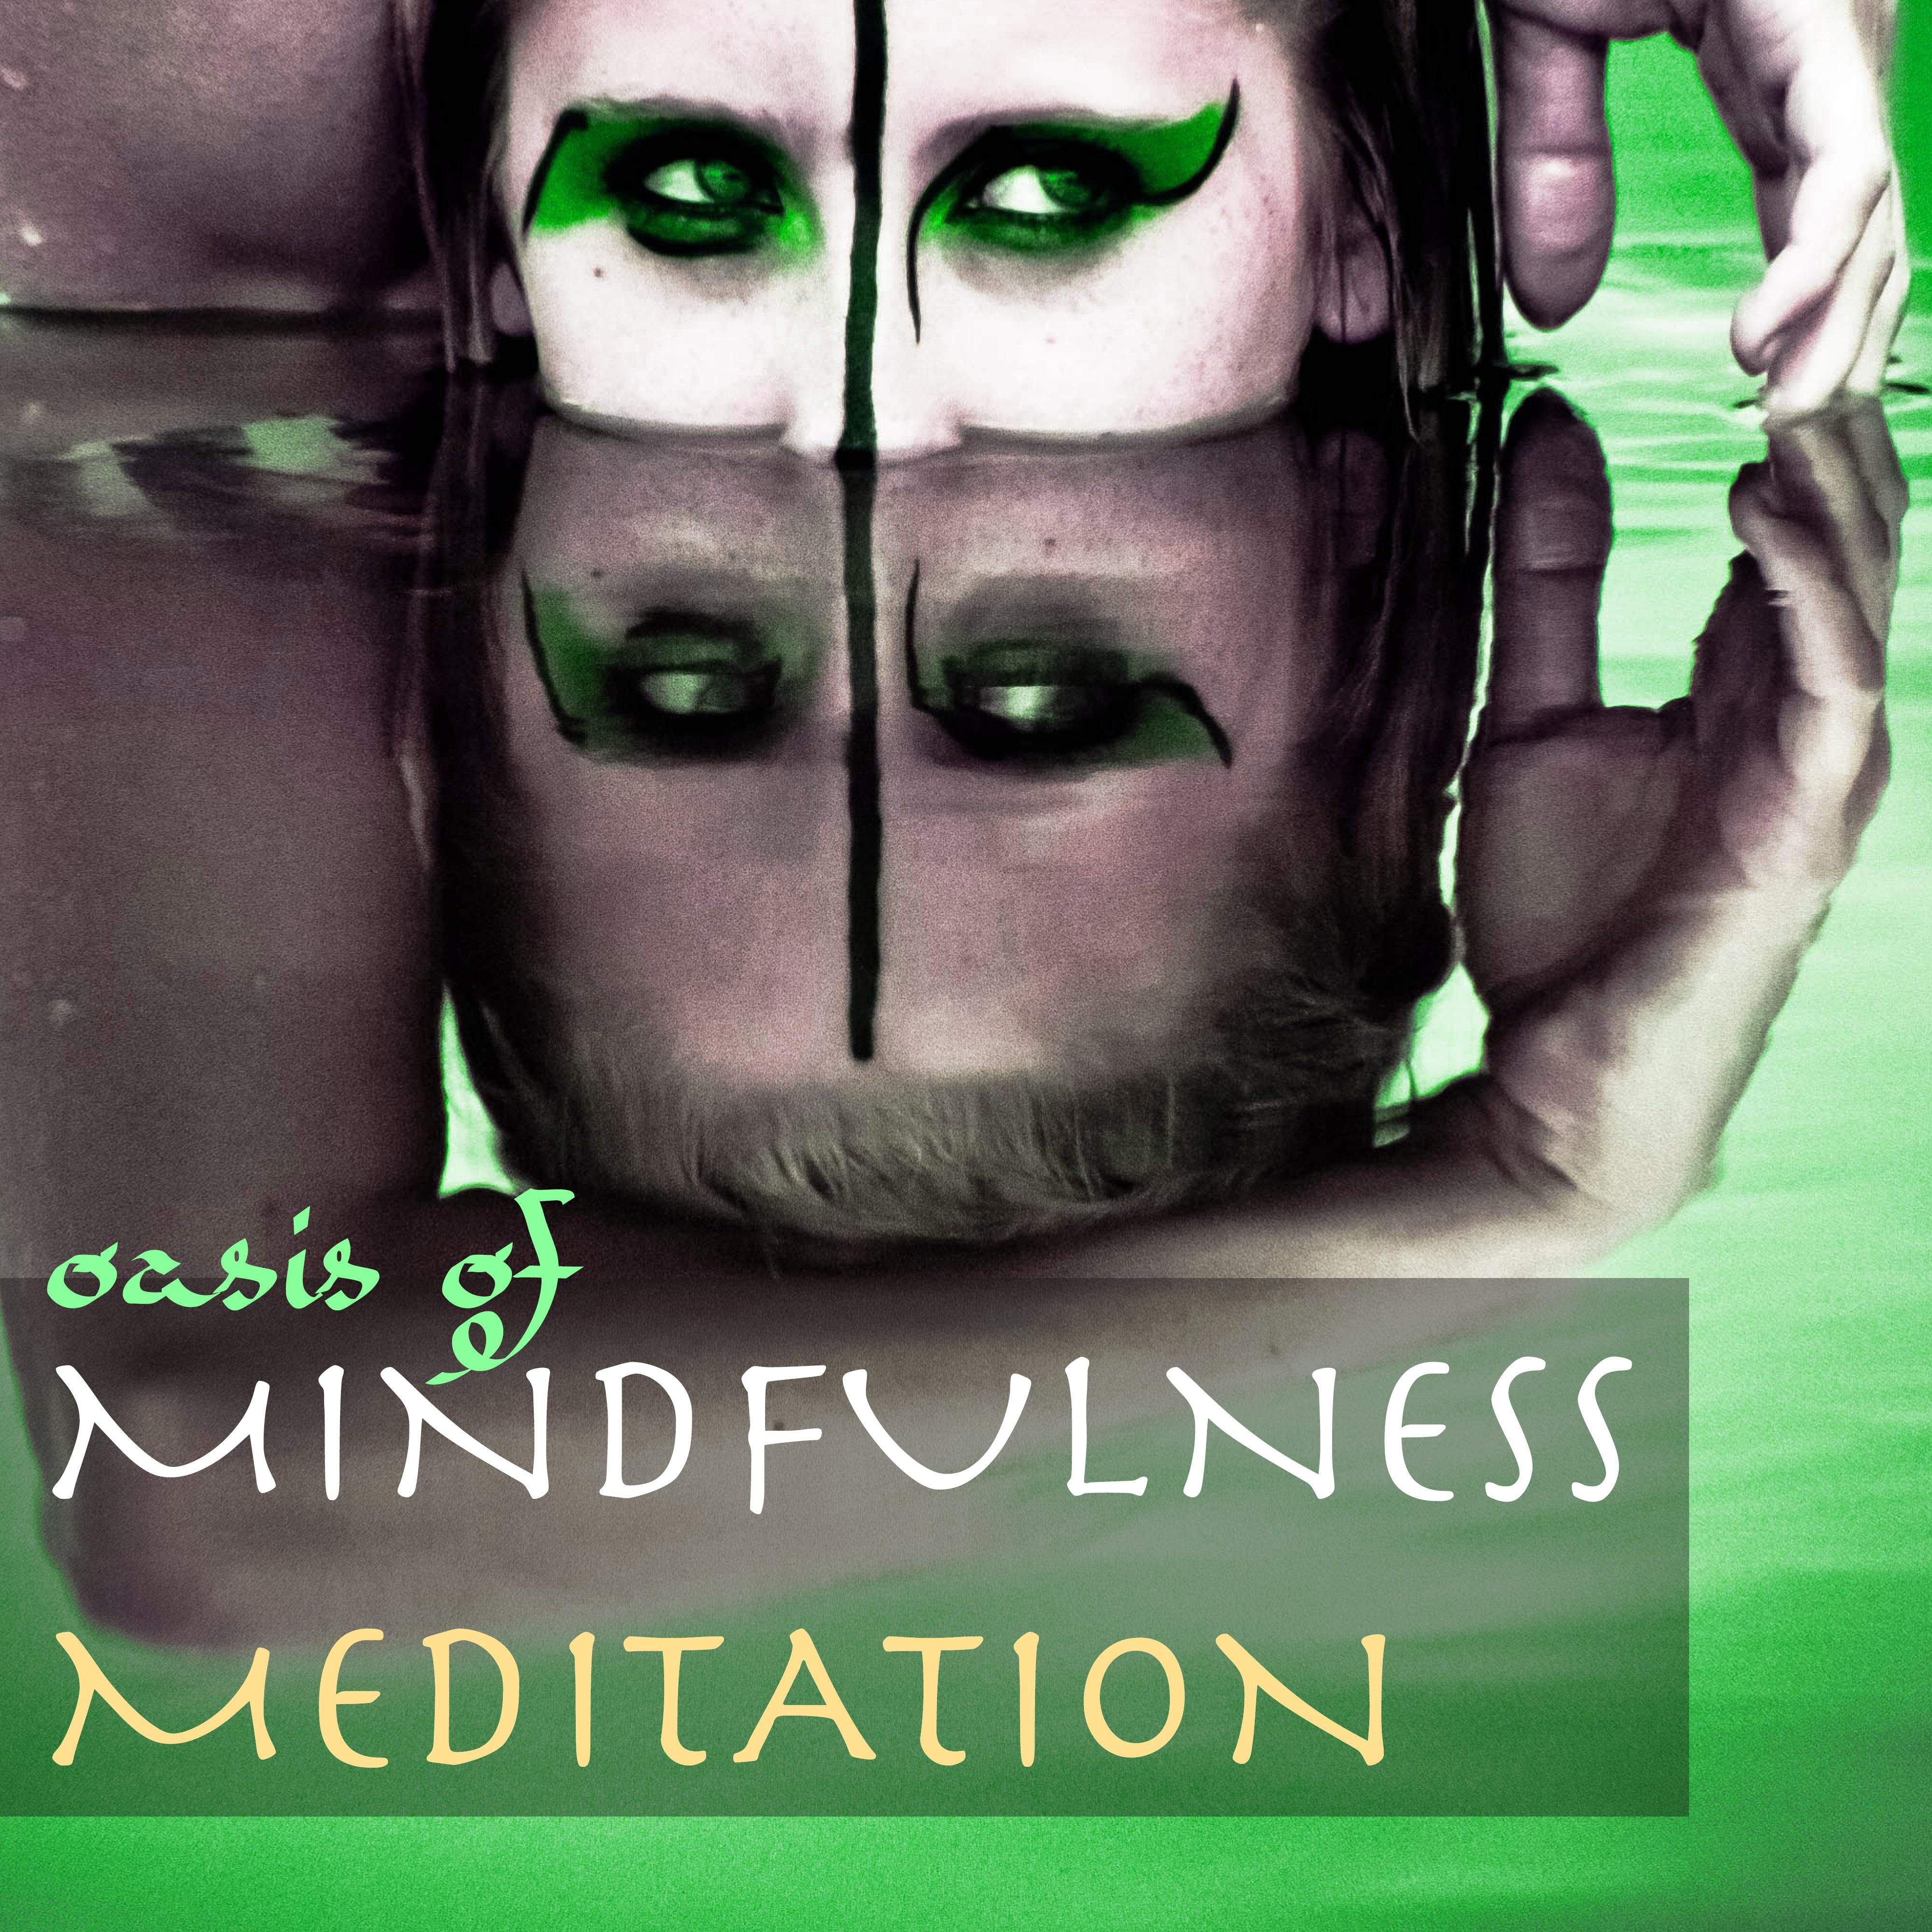 Oasis of Mindfulness Meditation - 30 Quiet Songs for Meditating, Spirituality Music